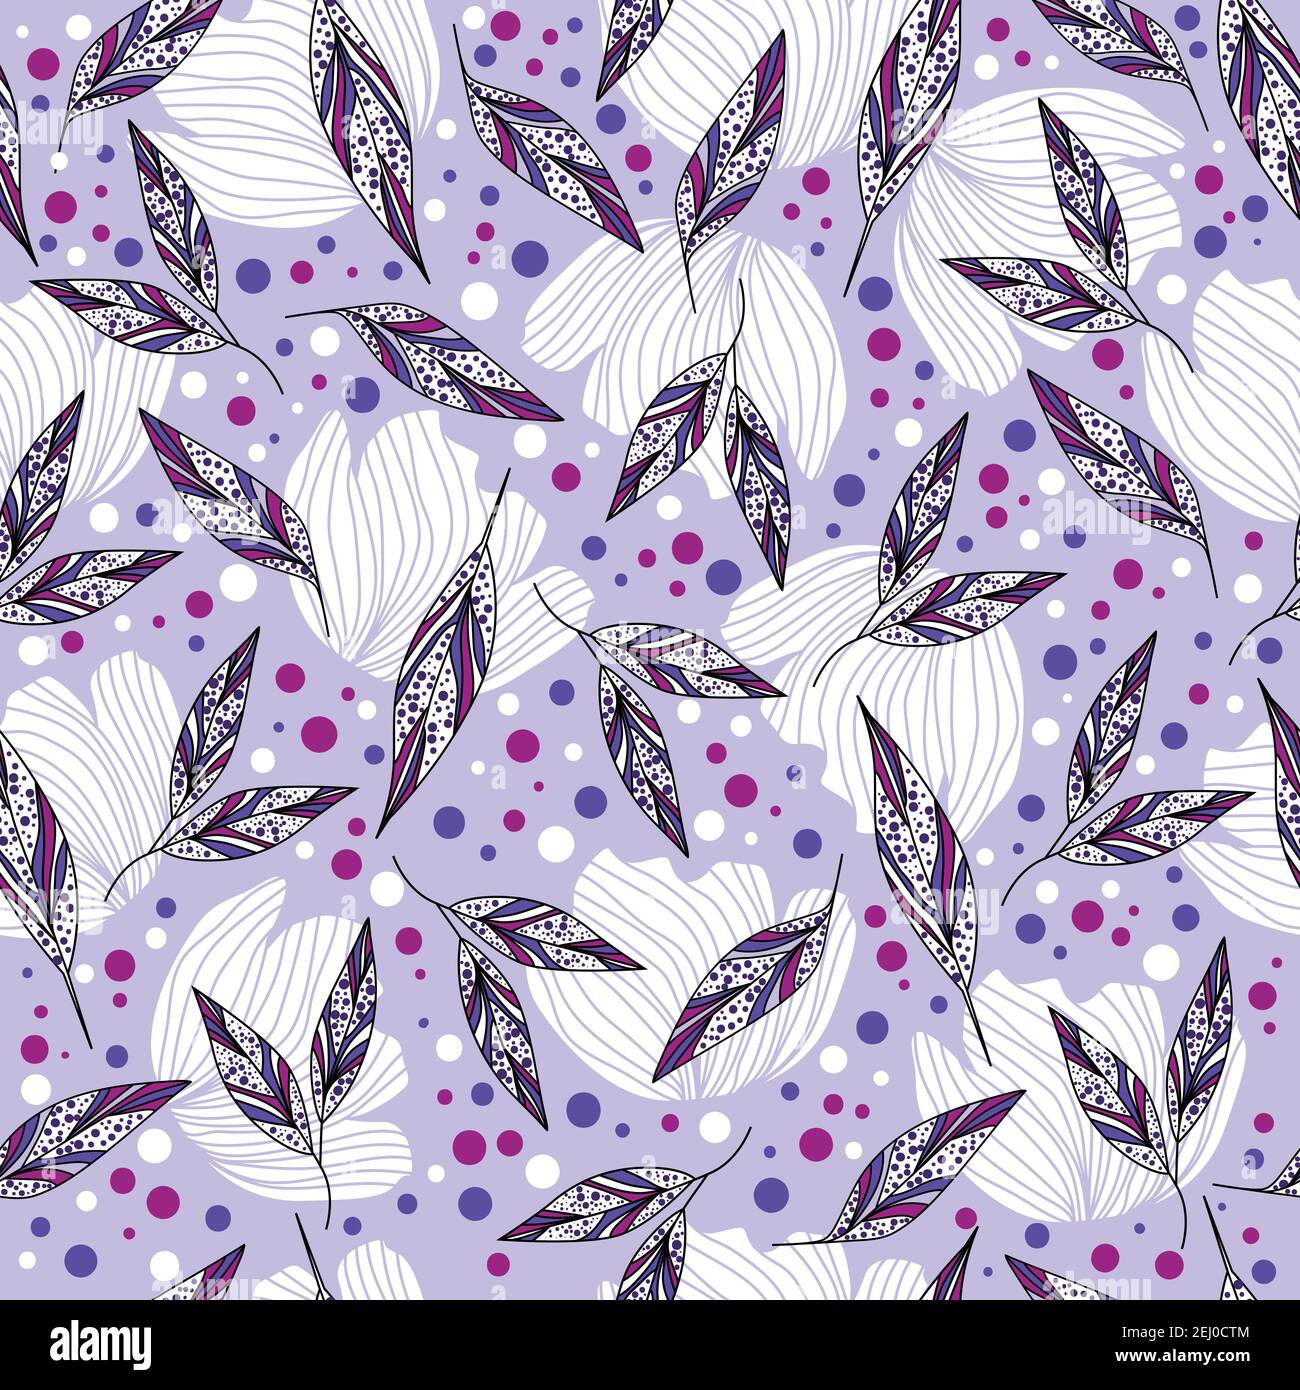 Abstract floral pattern design with flowers, leaves and dots on a light purple background Stock Vector